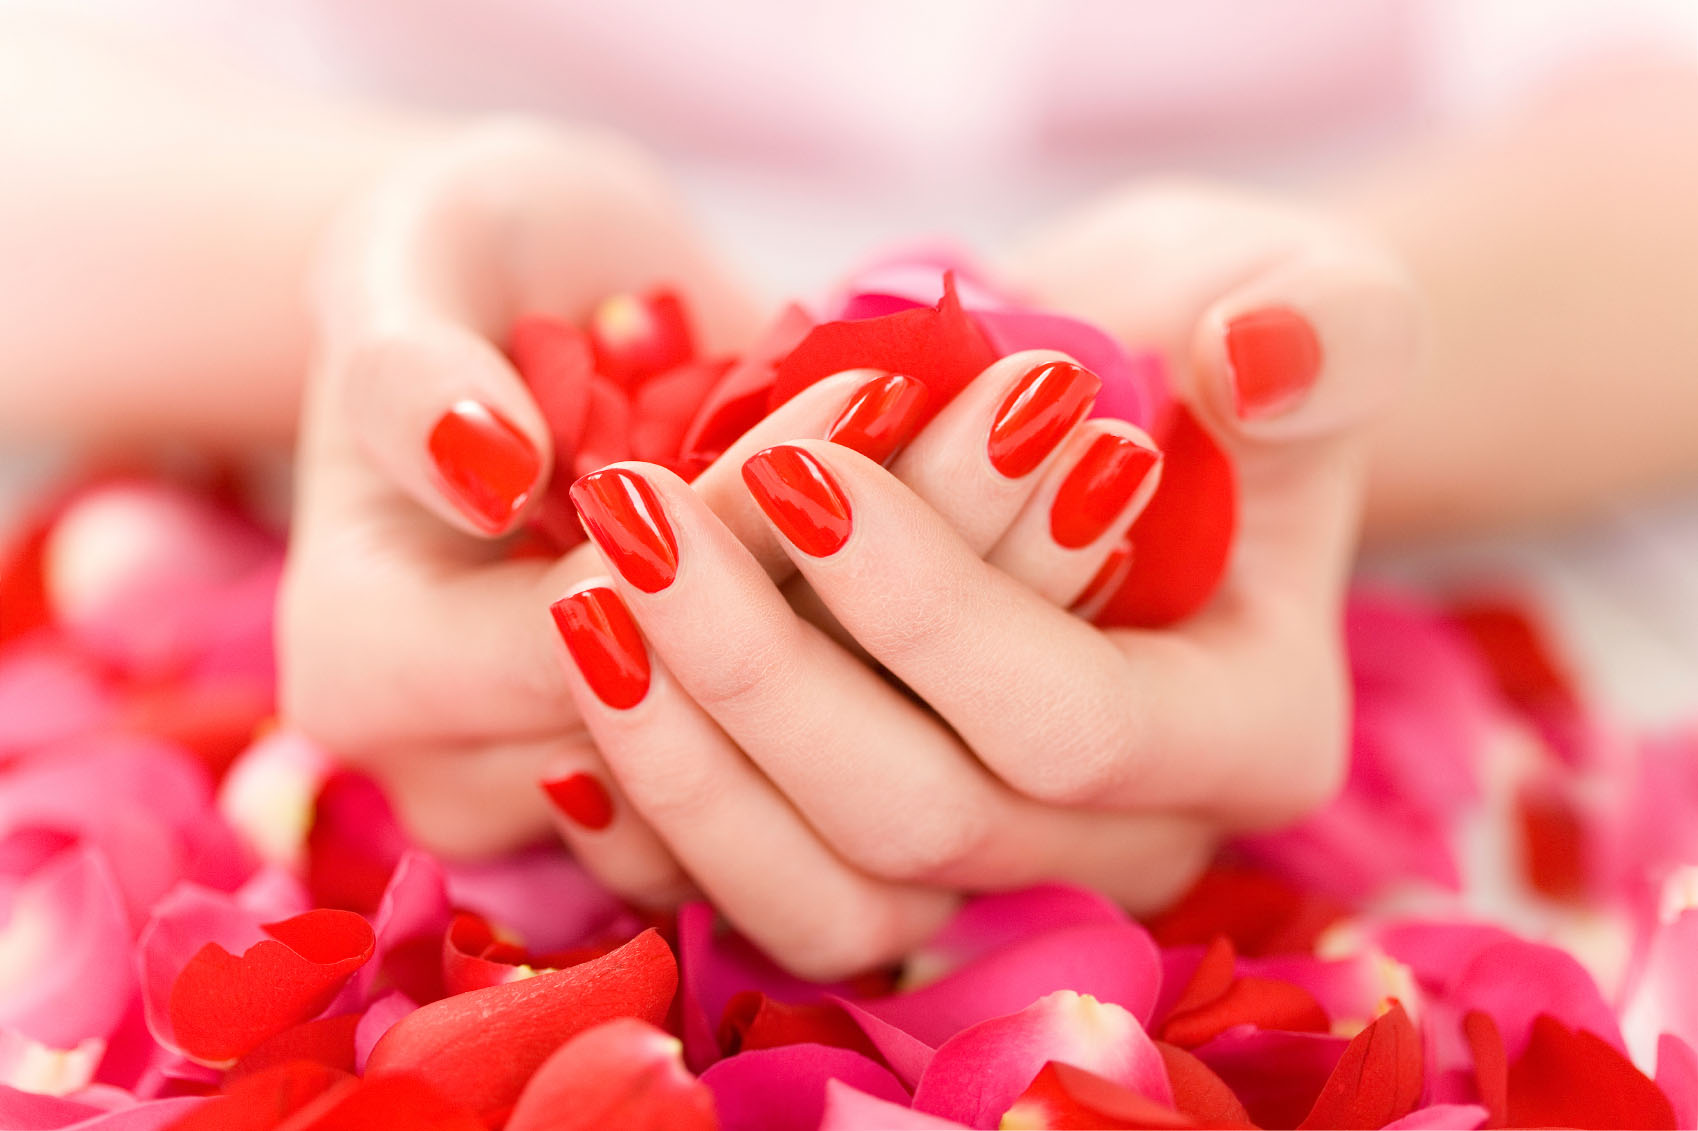 Manicures and Pedicures - wide 8